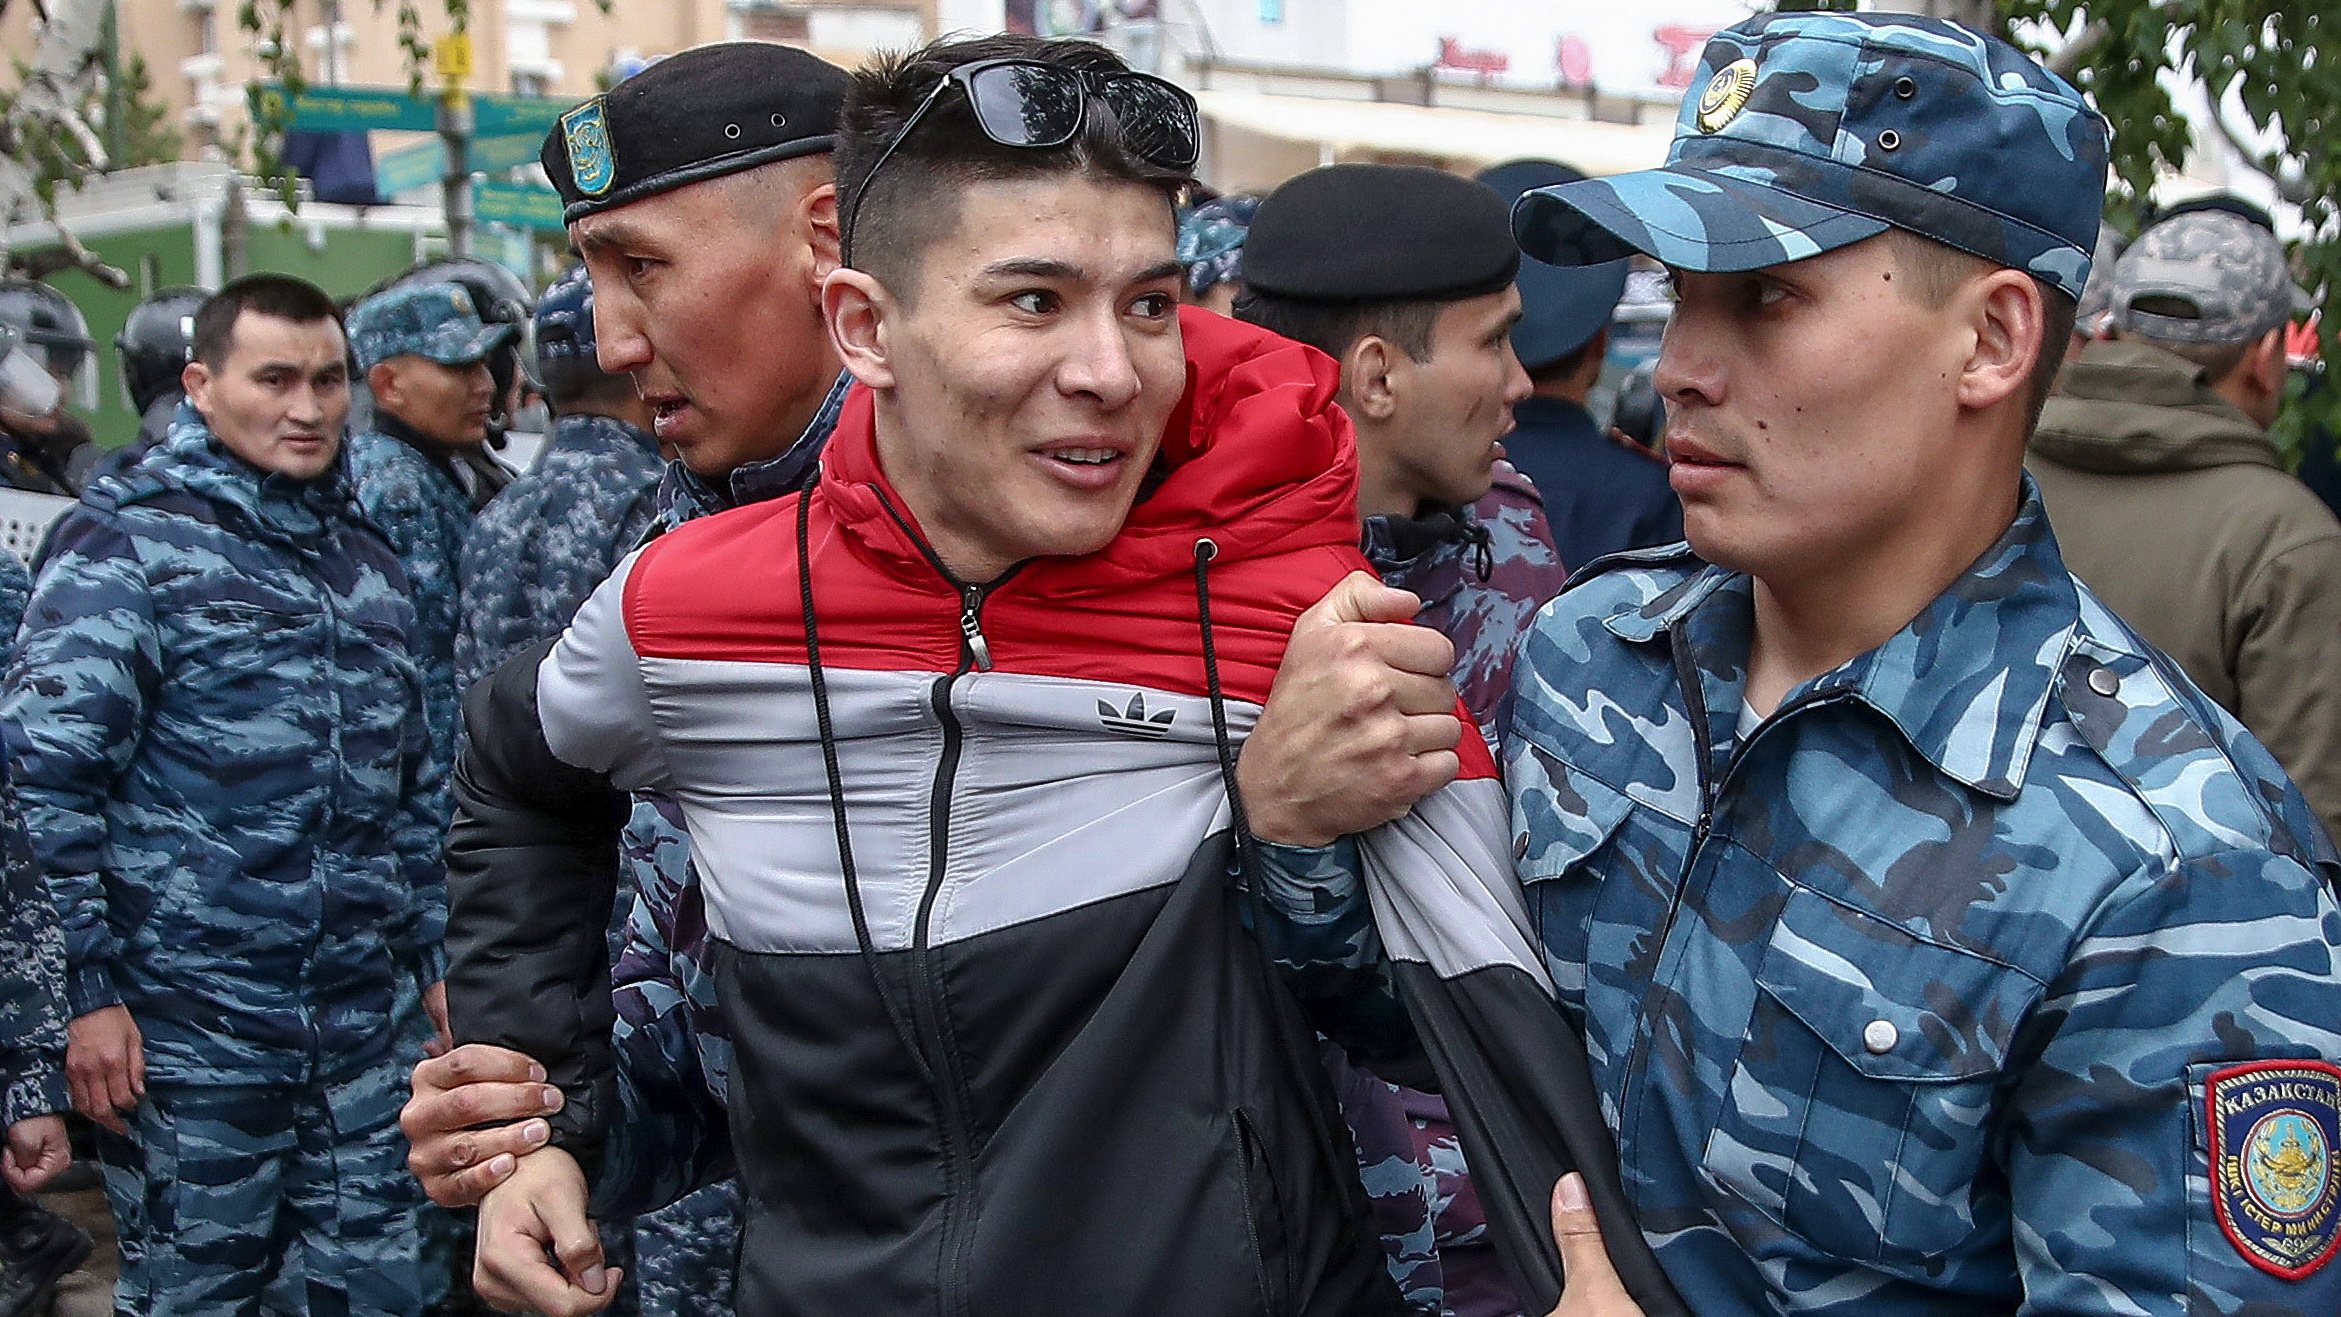 Protesters detained at 2019 Kazakh presidential election in Nur-Sultan